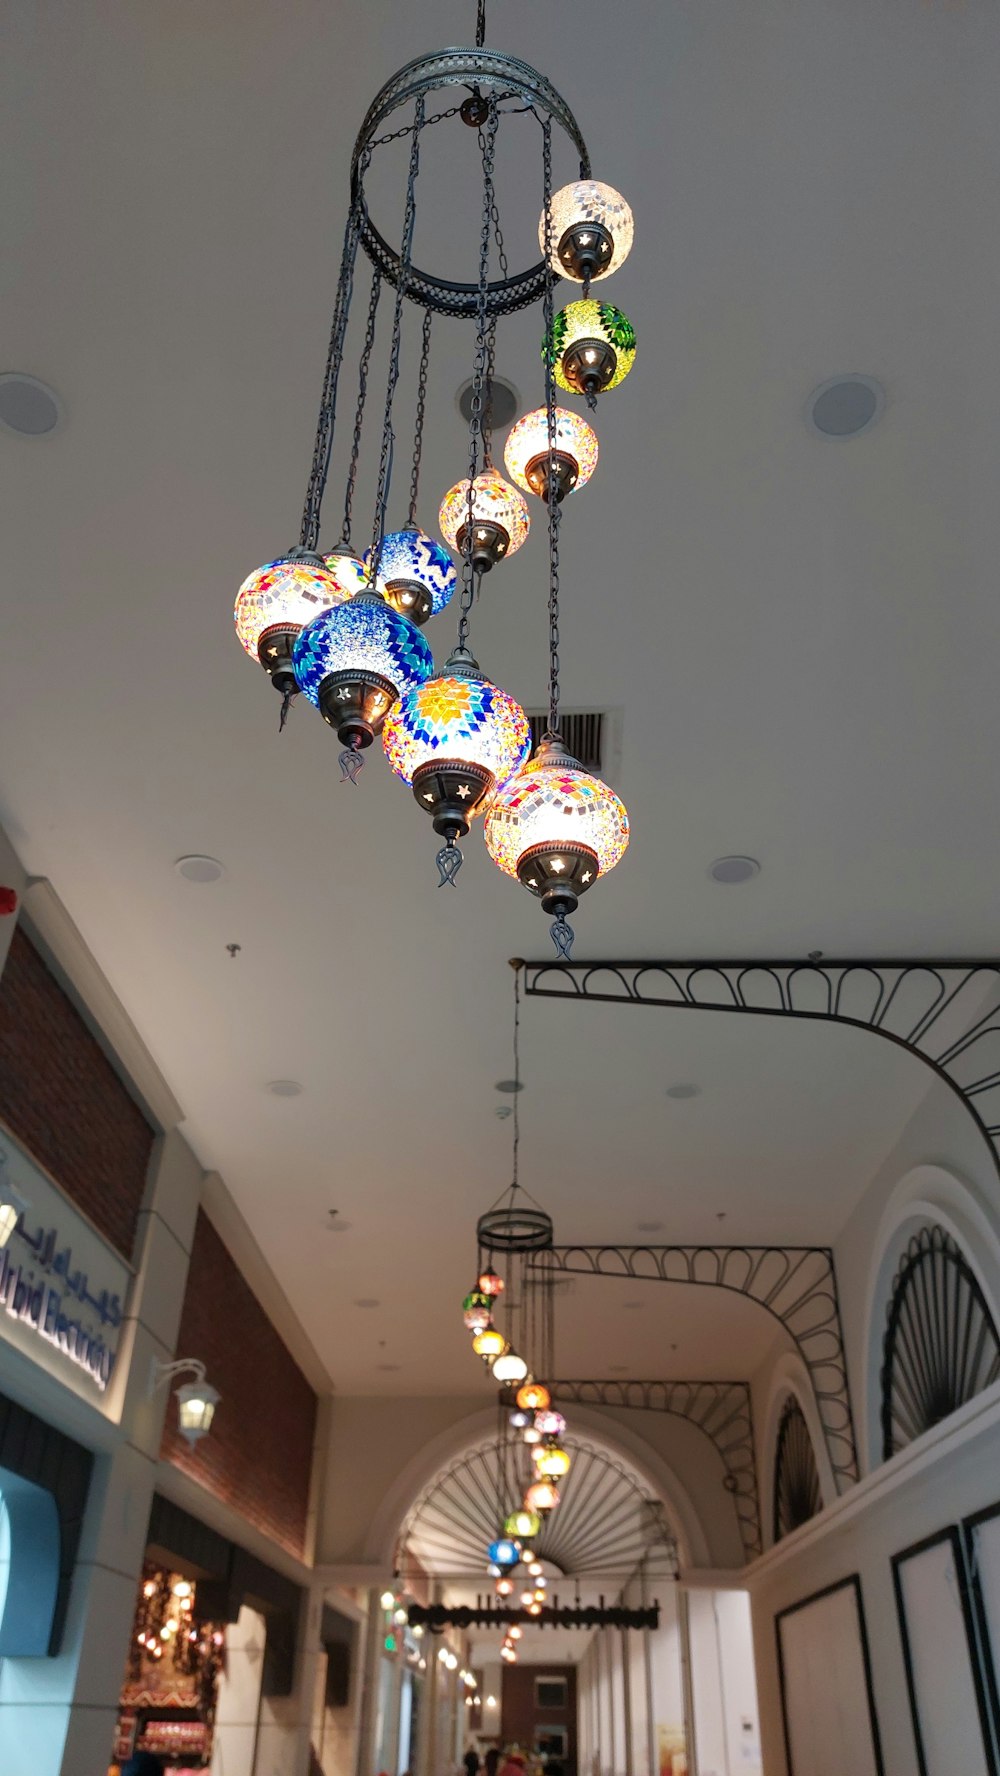 a chandelier hanging from the ceiling in a building